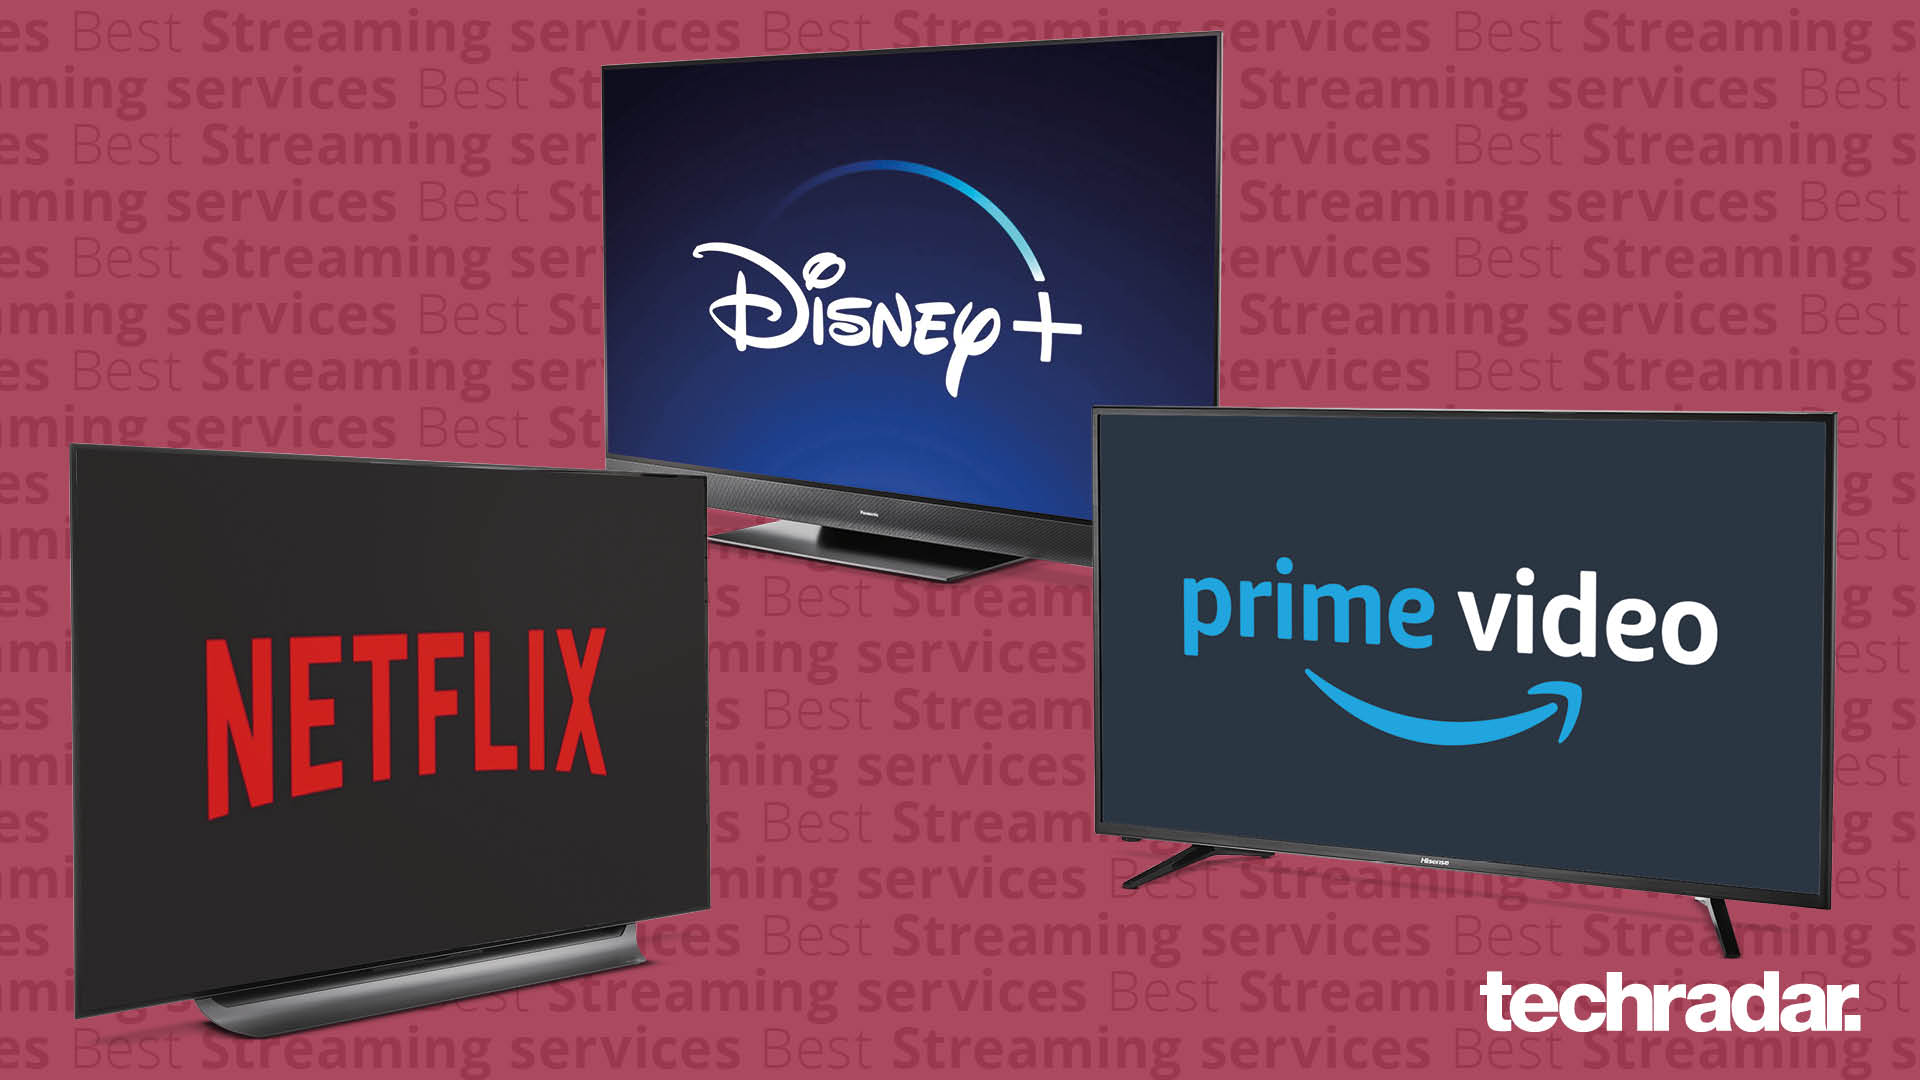 zebra morfin Athletic Best streaming service 2022: Netflix and more compared | TechRadar